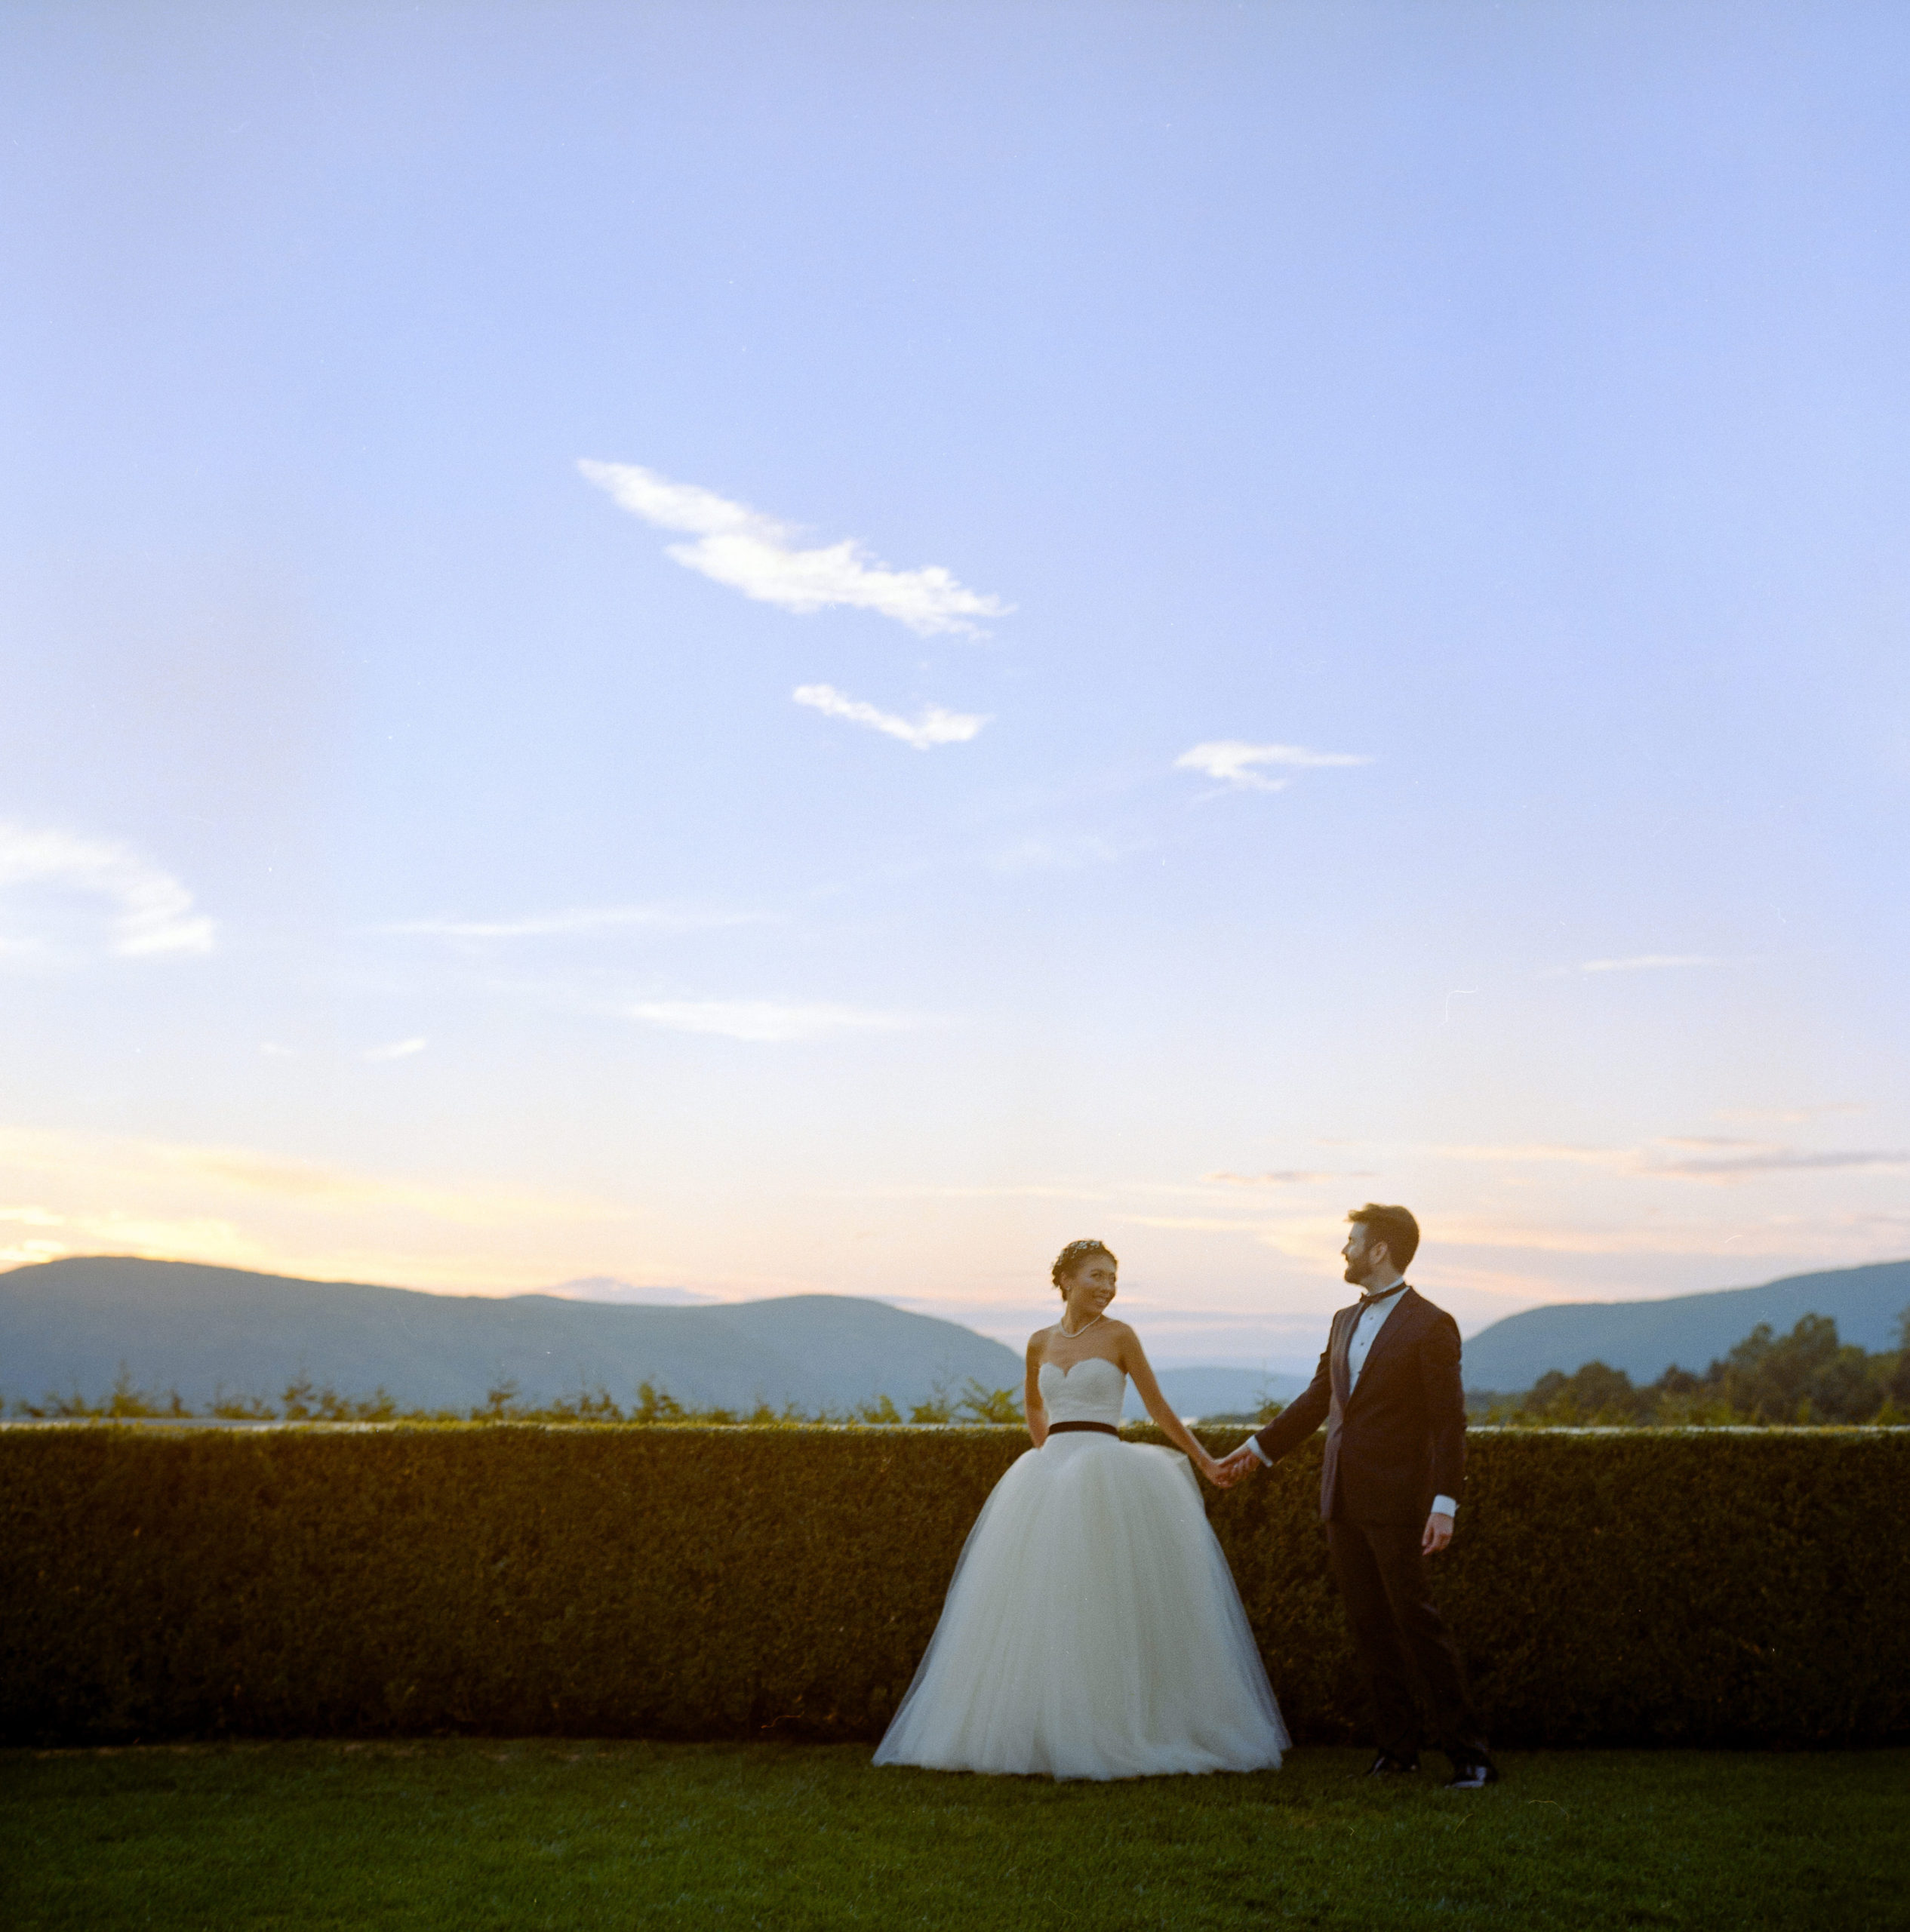 Sunset photo of the bride and groom in a garden. Film photography image by Jenny Fu Studio